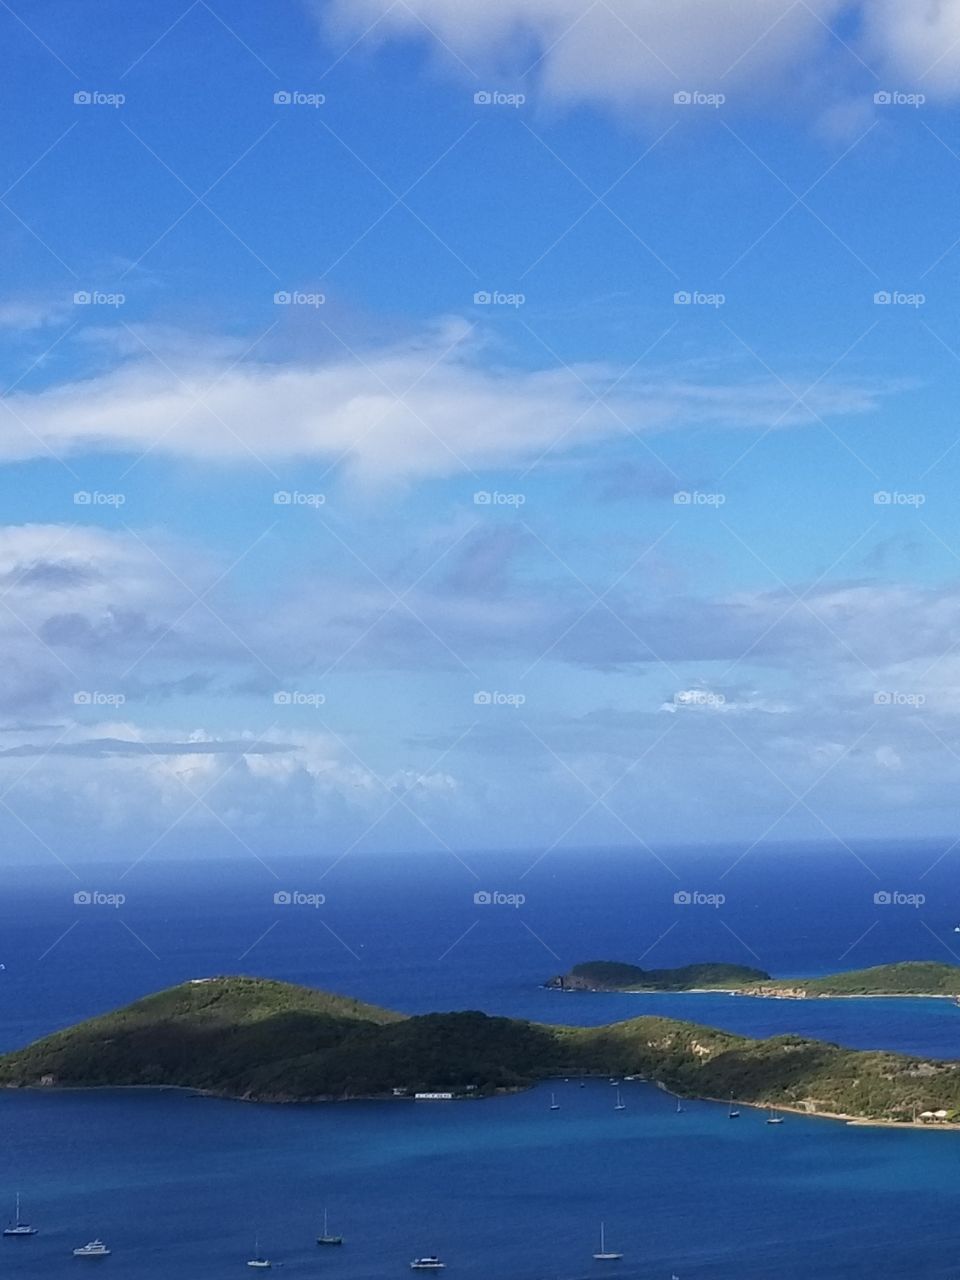 From the top of St Thomas island